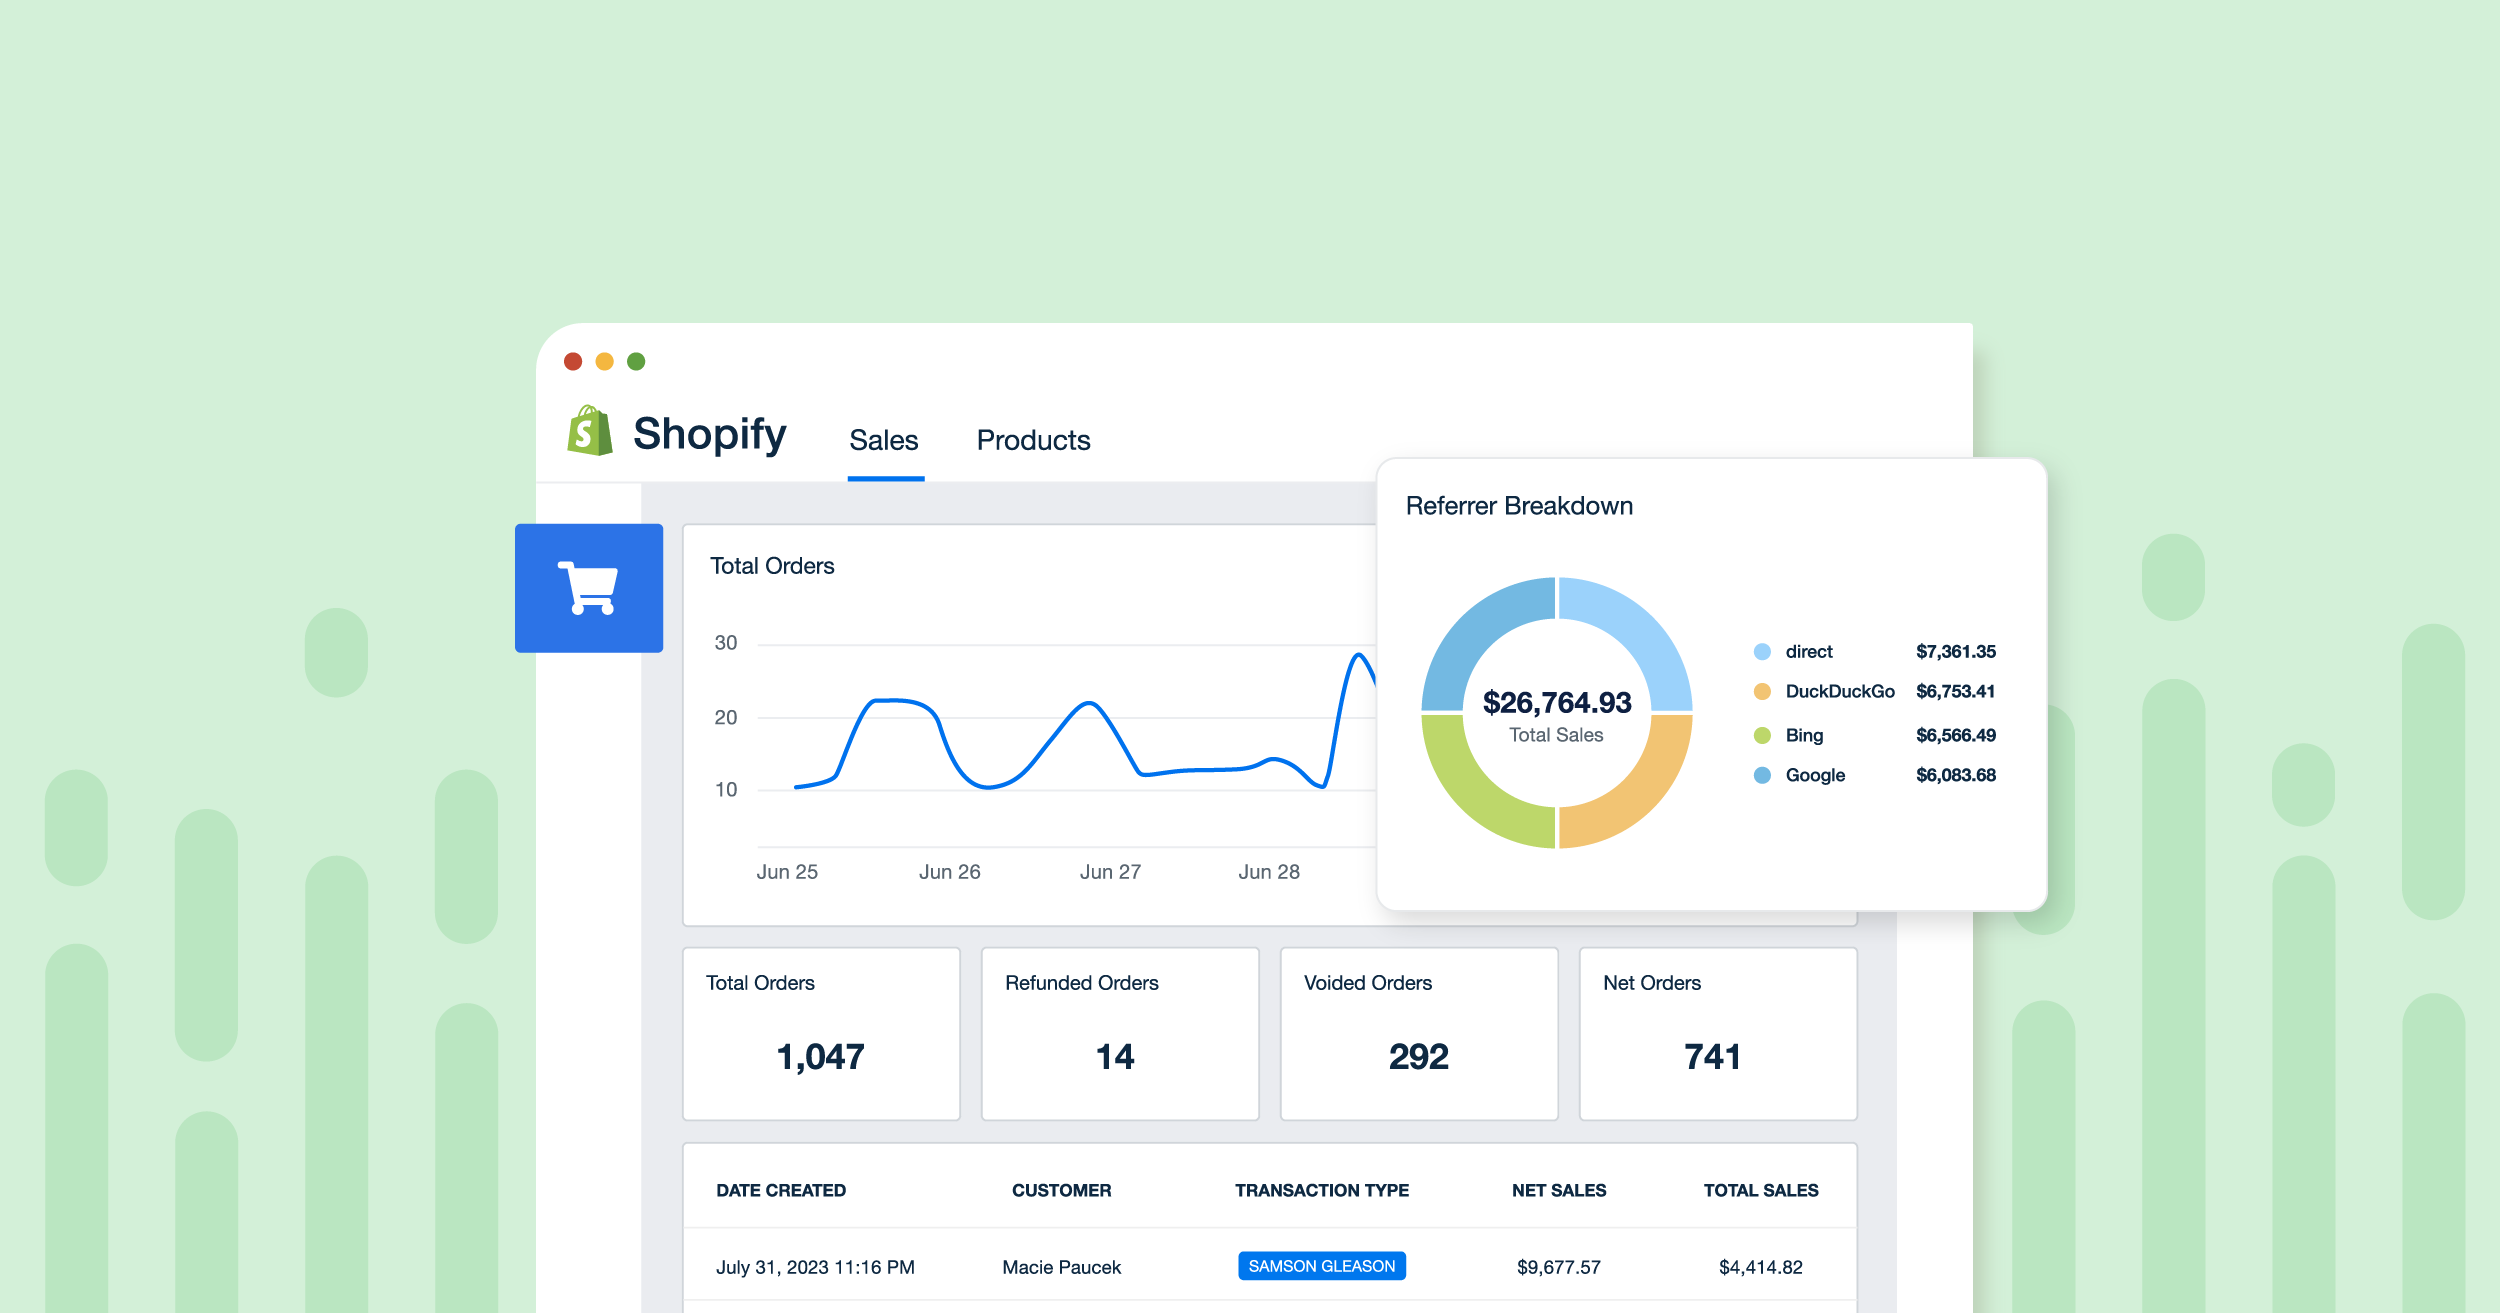 How to Login to Shopify Admin, Partner Dashboard & Customer Account